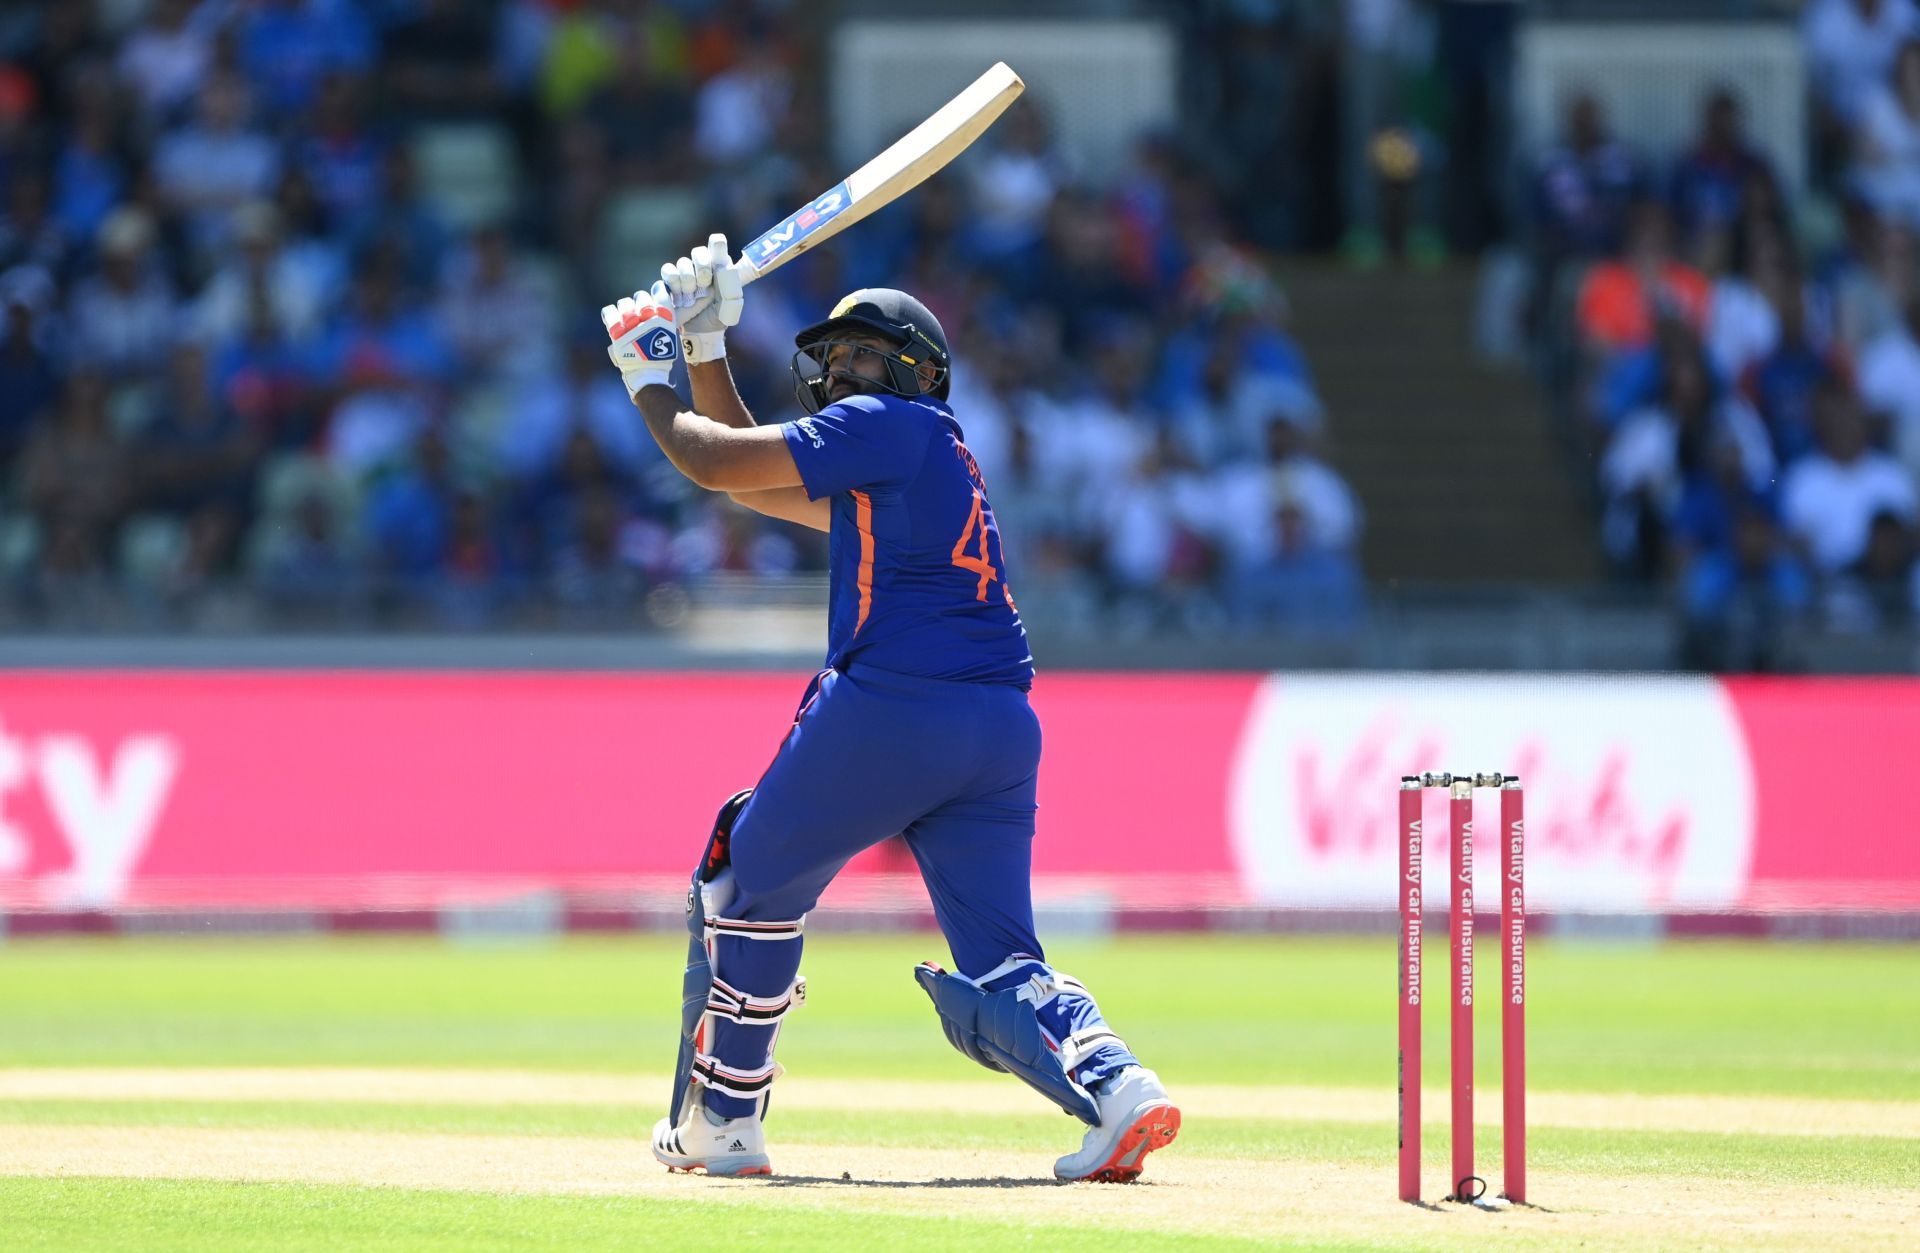 Team India are playing a slightly more aggressive brand of cricket under Rohit Sharma